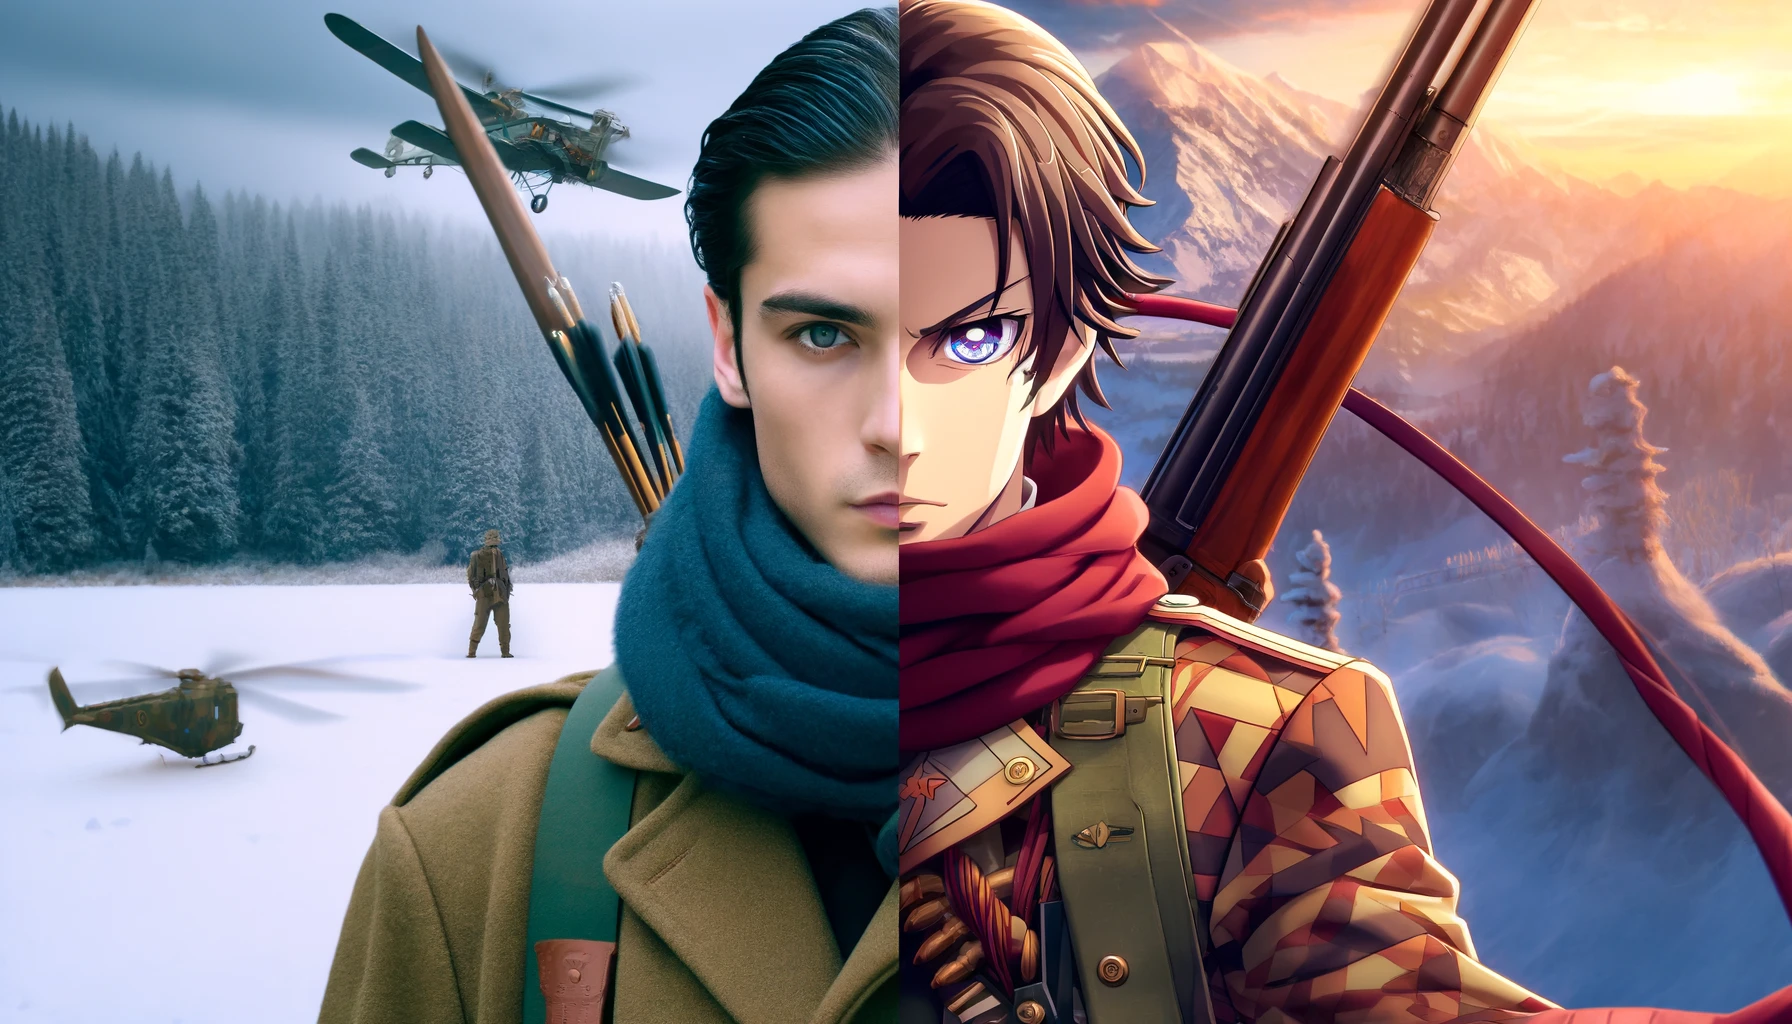 A split-image depicting two versions of a male anime character inspired by Hyakunosuke Ogata from 'Golden Kamuy'. On the left side, a realistic portrayal of the character, featuring a live-action style actor with subtle expressions and detailed attire. On the right side, an exaggerated anime version with vibrant colors, dramatic facial expressions, and stylish outfit. The background shows a snowy wilderness scene, emphasizing the character's sniper theme. The image should clearly contrast the different styles of live-action and anime.